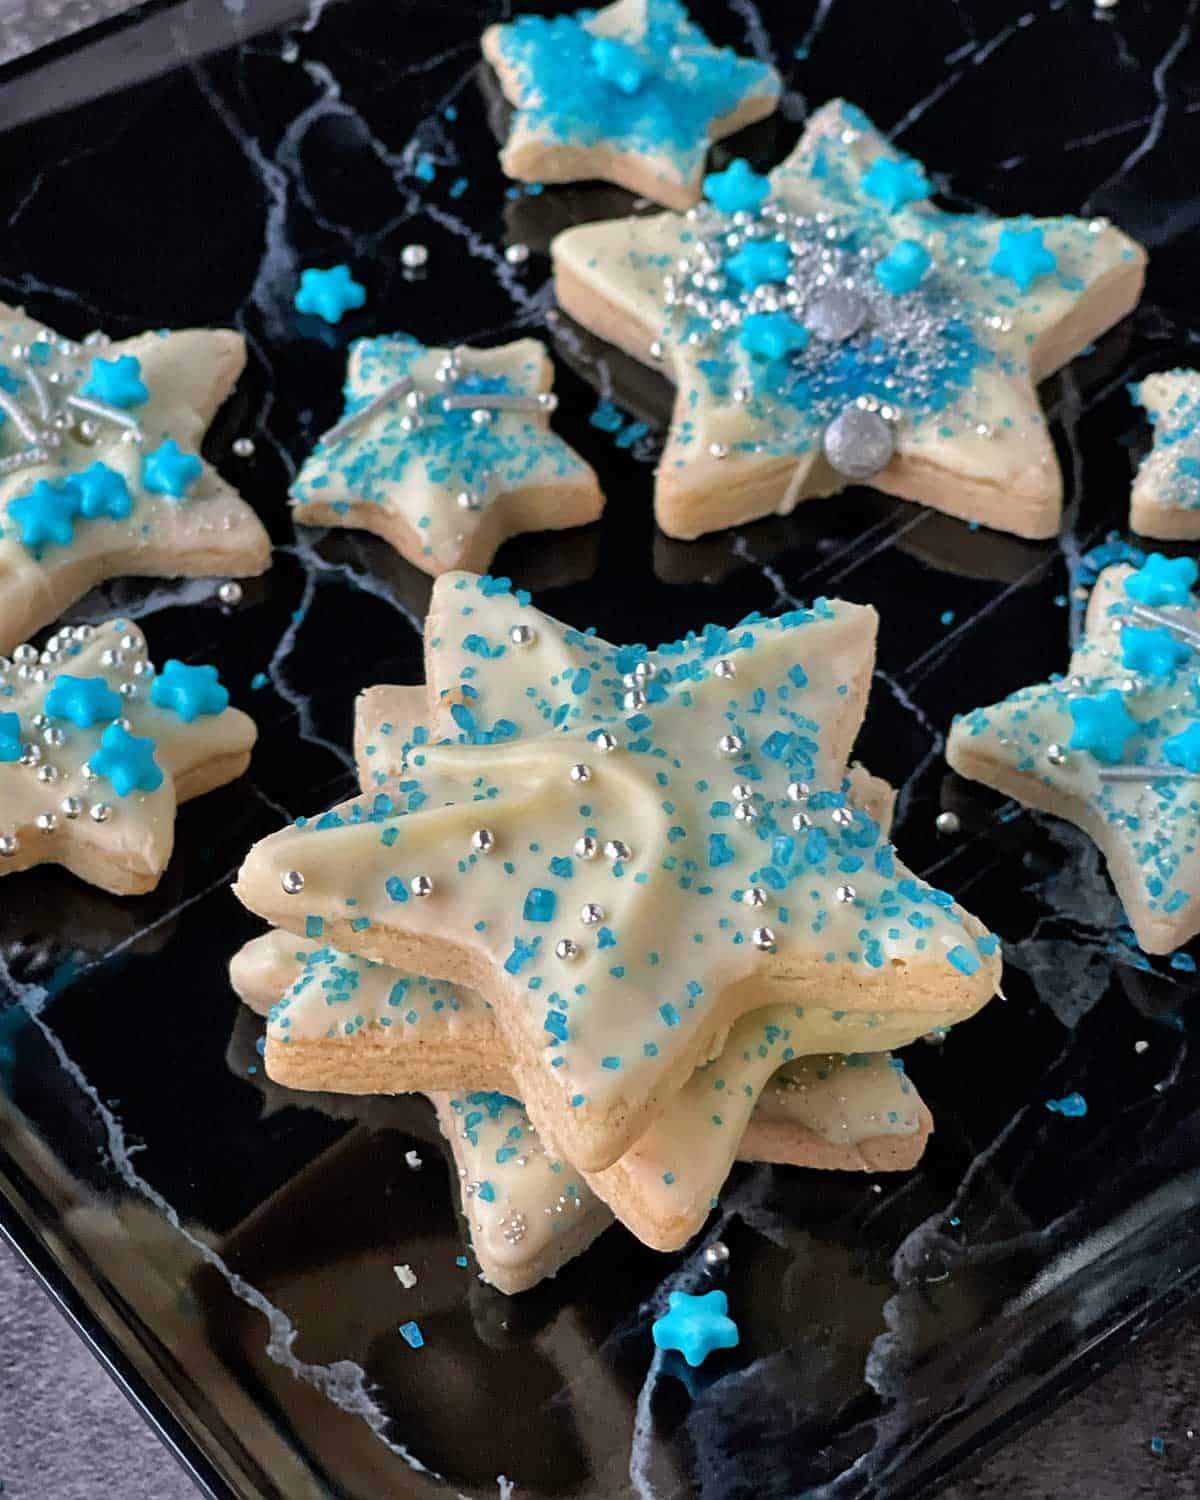 A tray with an assortment of Cinnamon Shortbread Cookies covered in white chocolate and blue sprinkles.